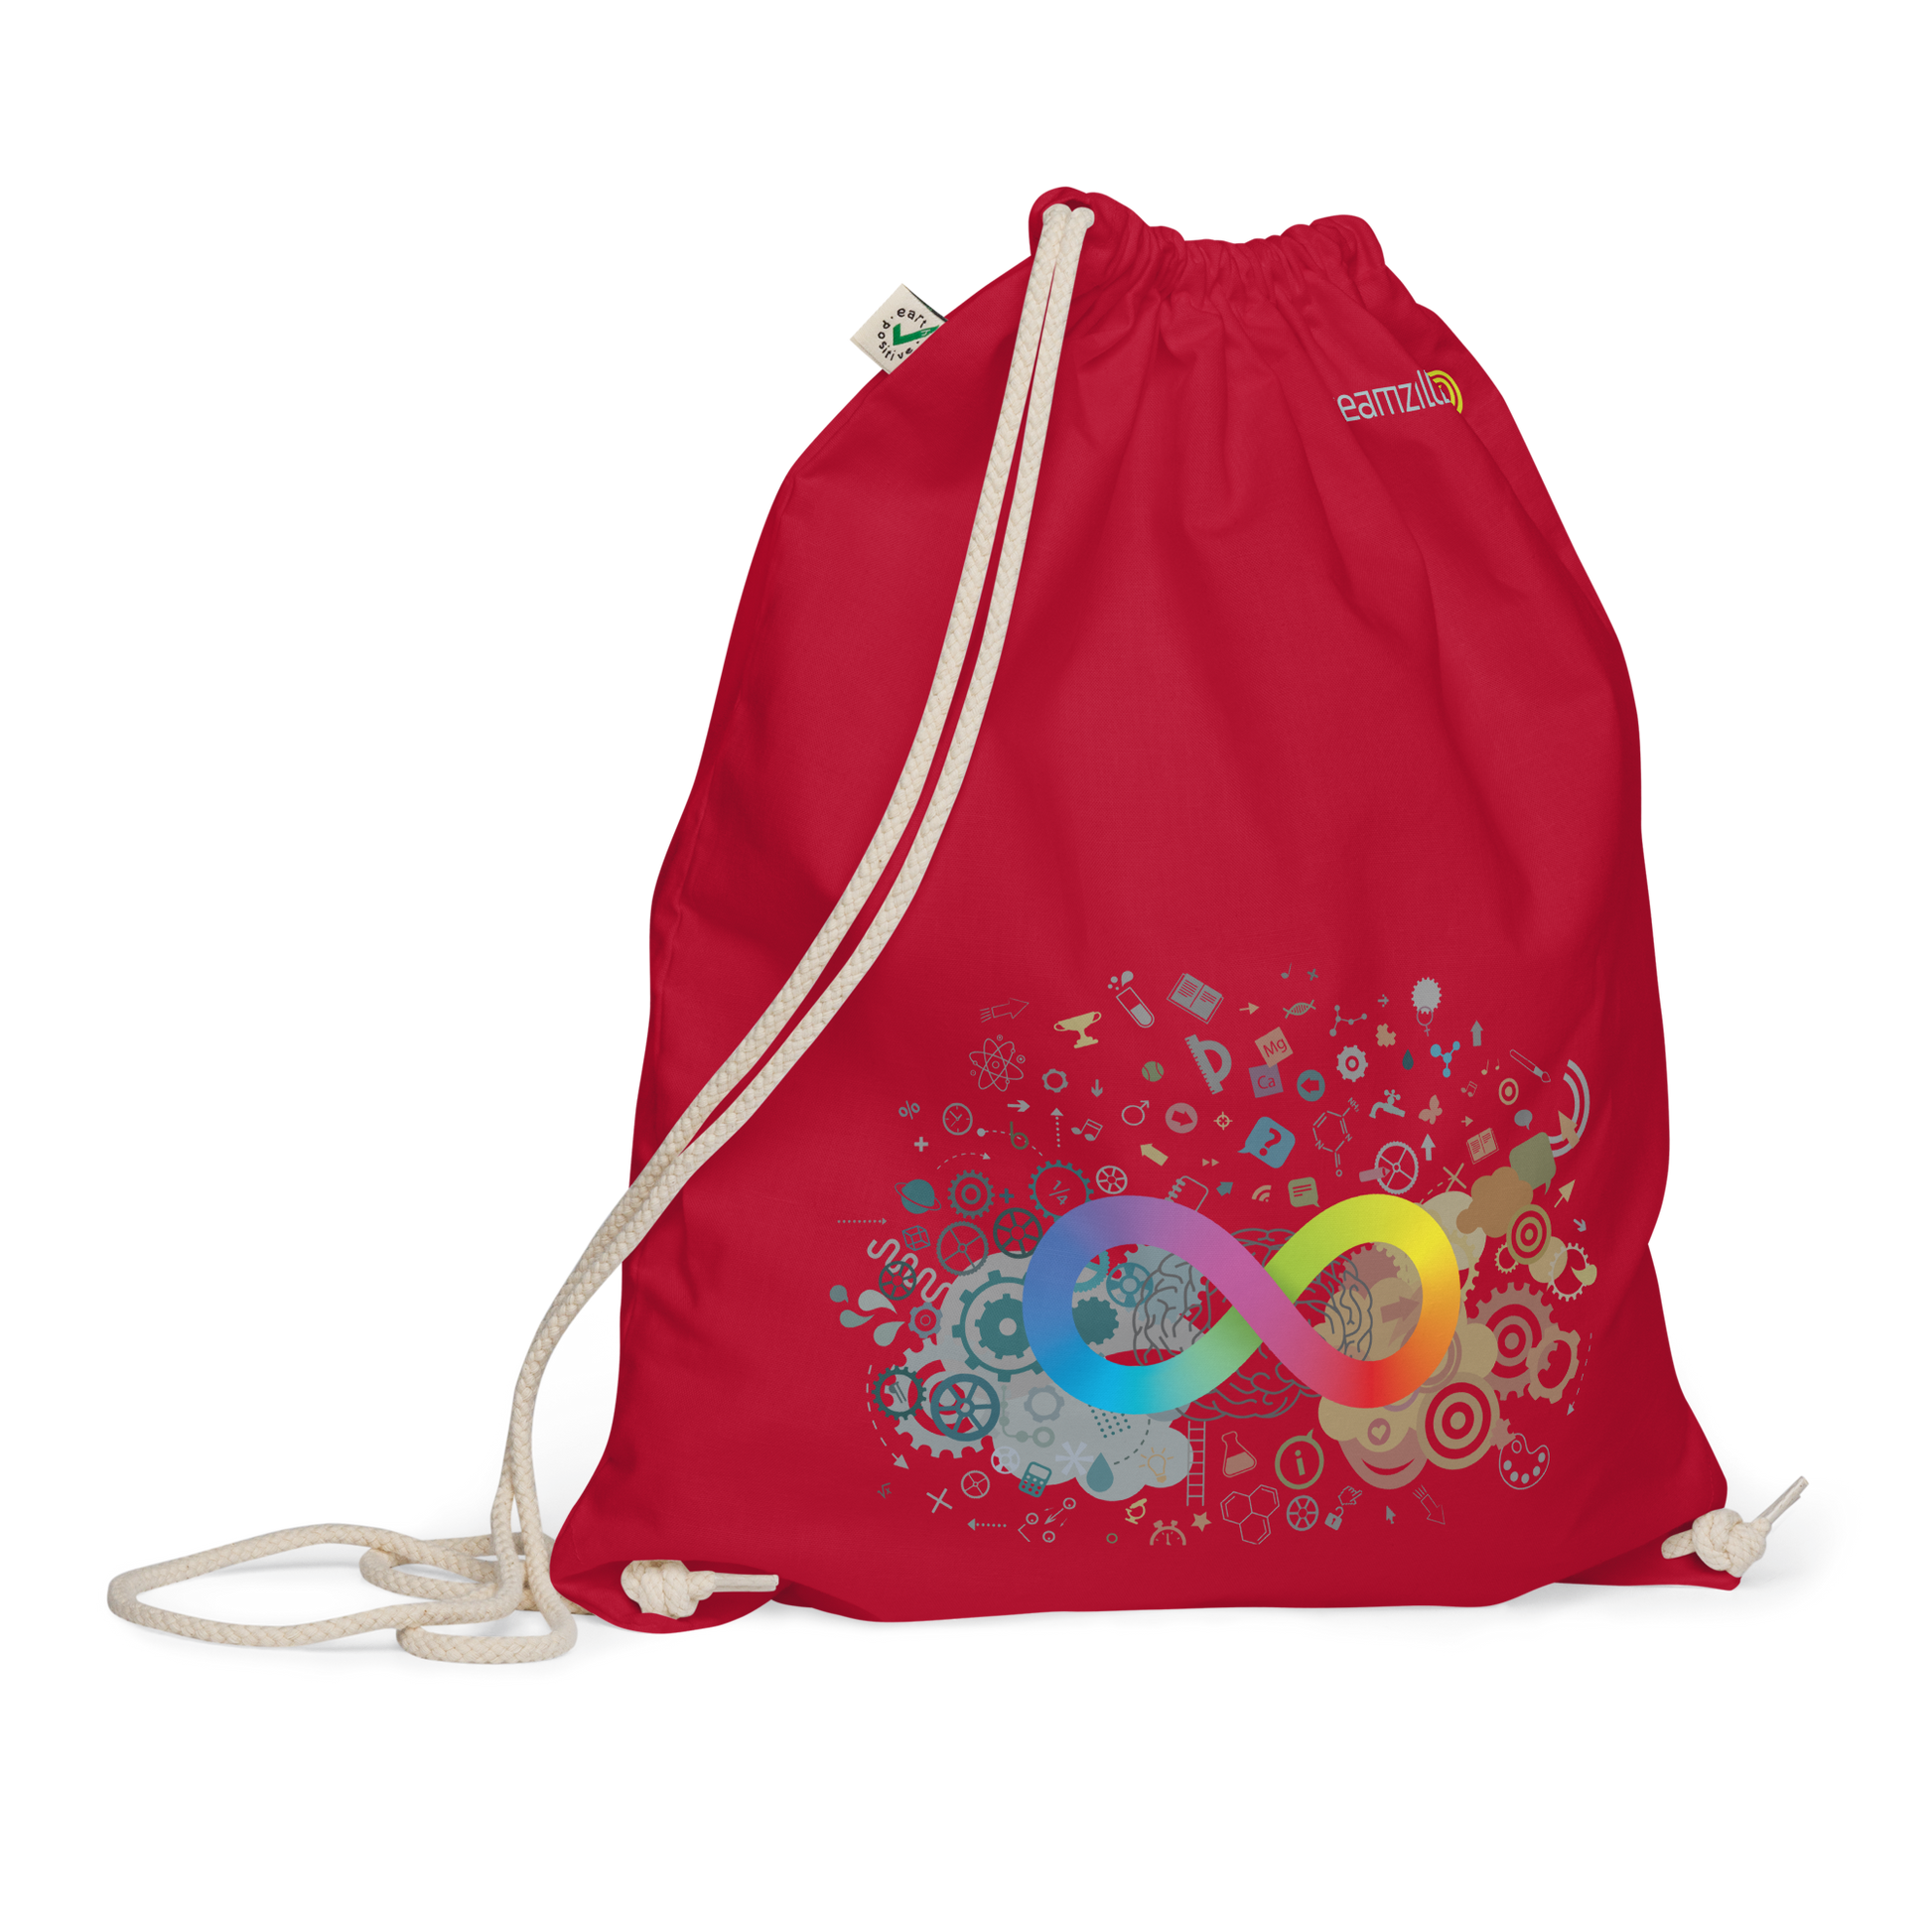 Neurodiversity Rainbow Infinity EarthPositive Cotton Drawstring Bag in Red